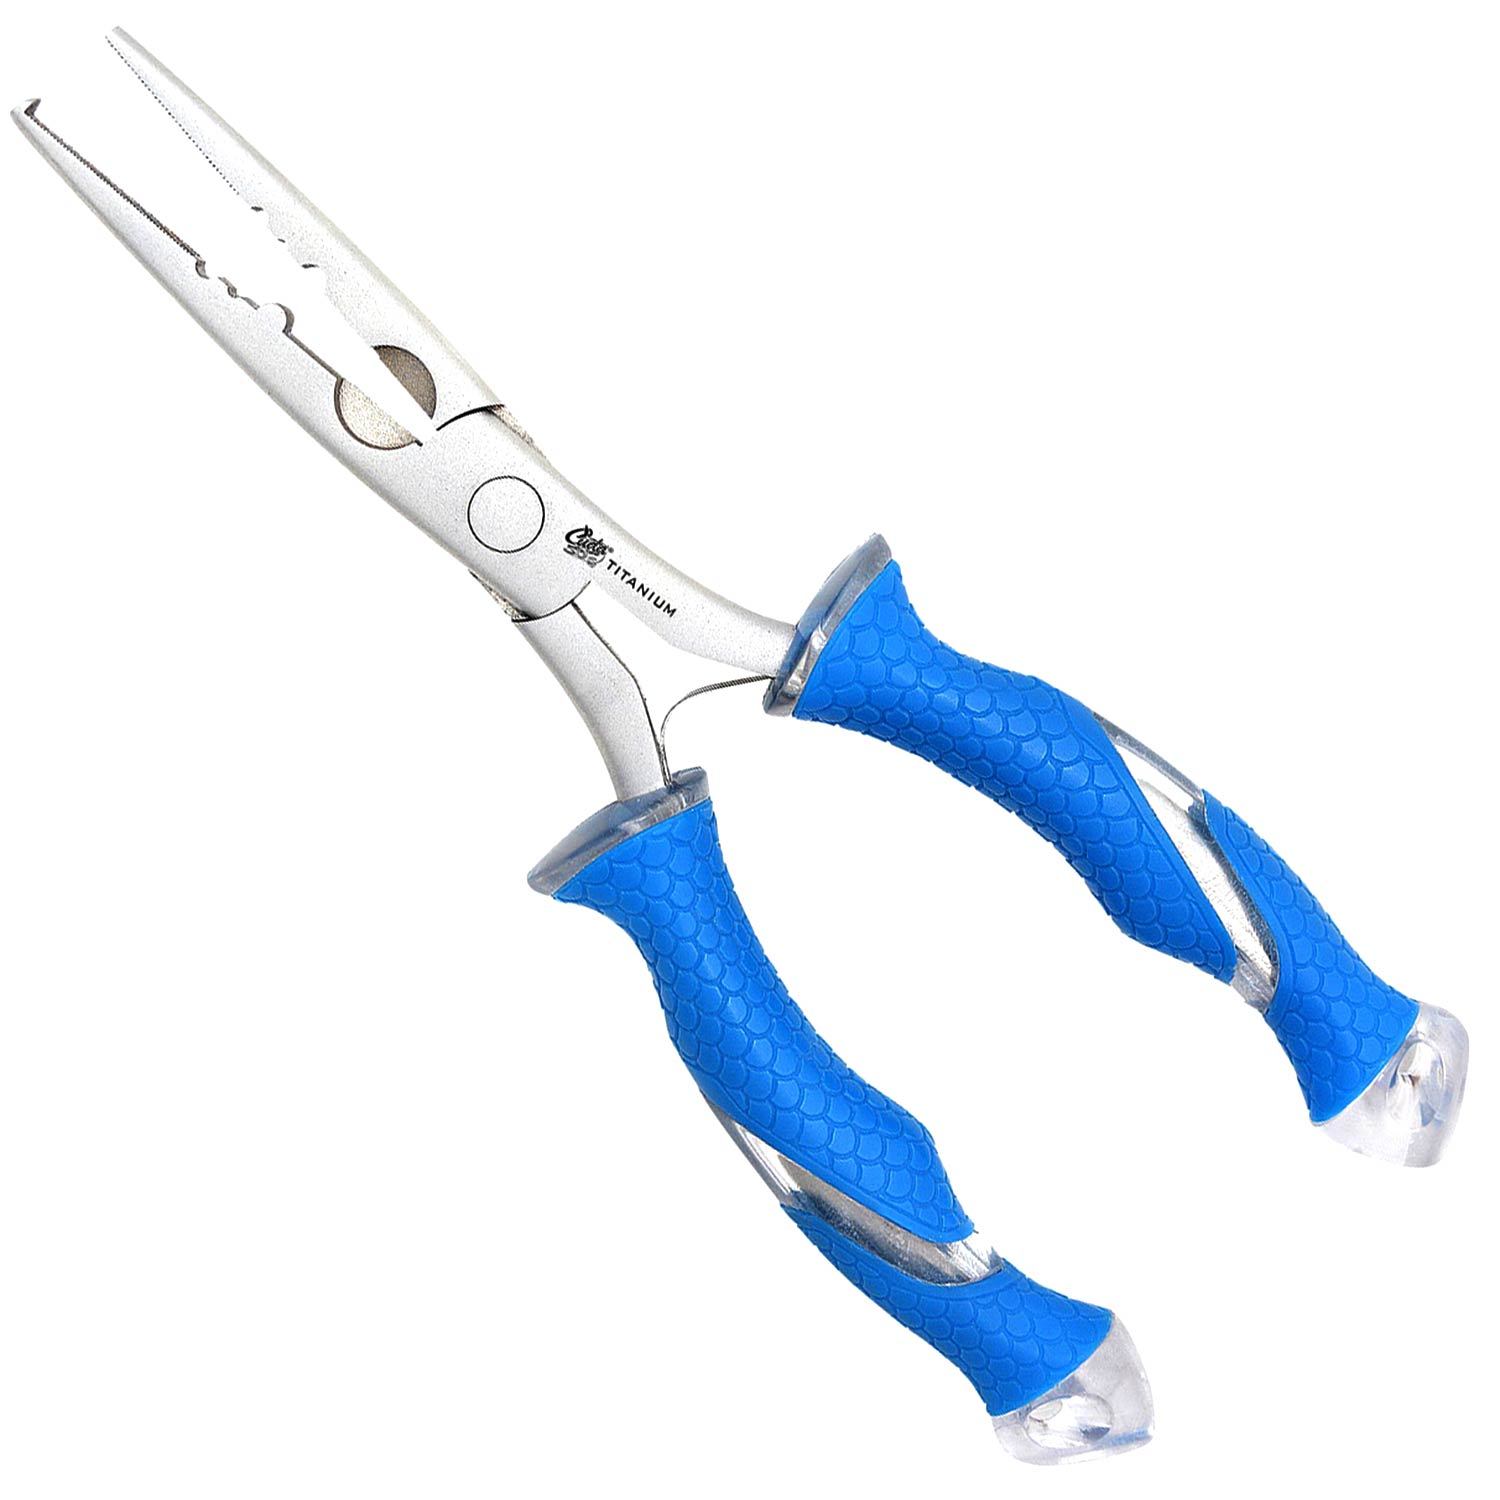 Stainless Steel Tie Hook Pliers Flat Nose Pliers Fishing Pliers Elbow  Pliers Spring Pliers Red Handle Pliers New Gadgets (Red, One Size)